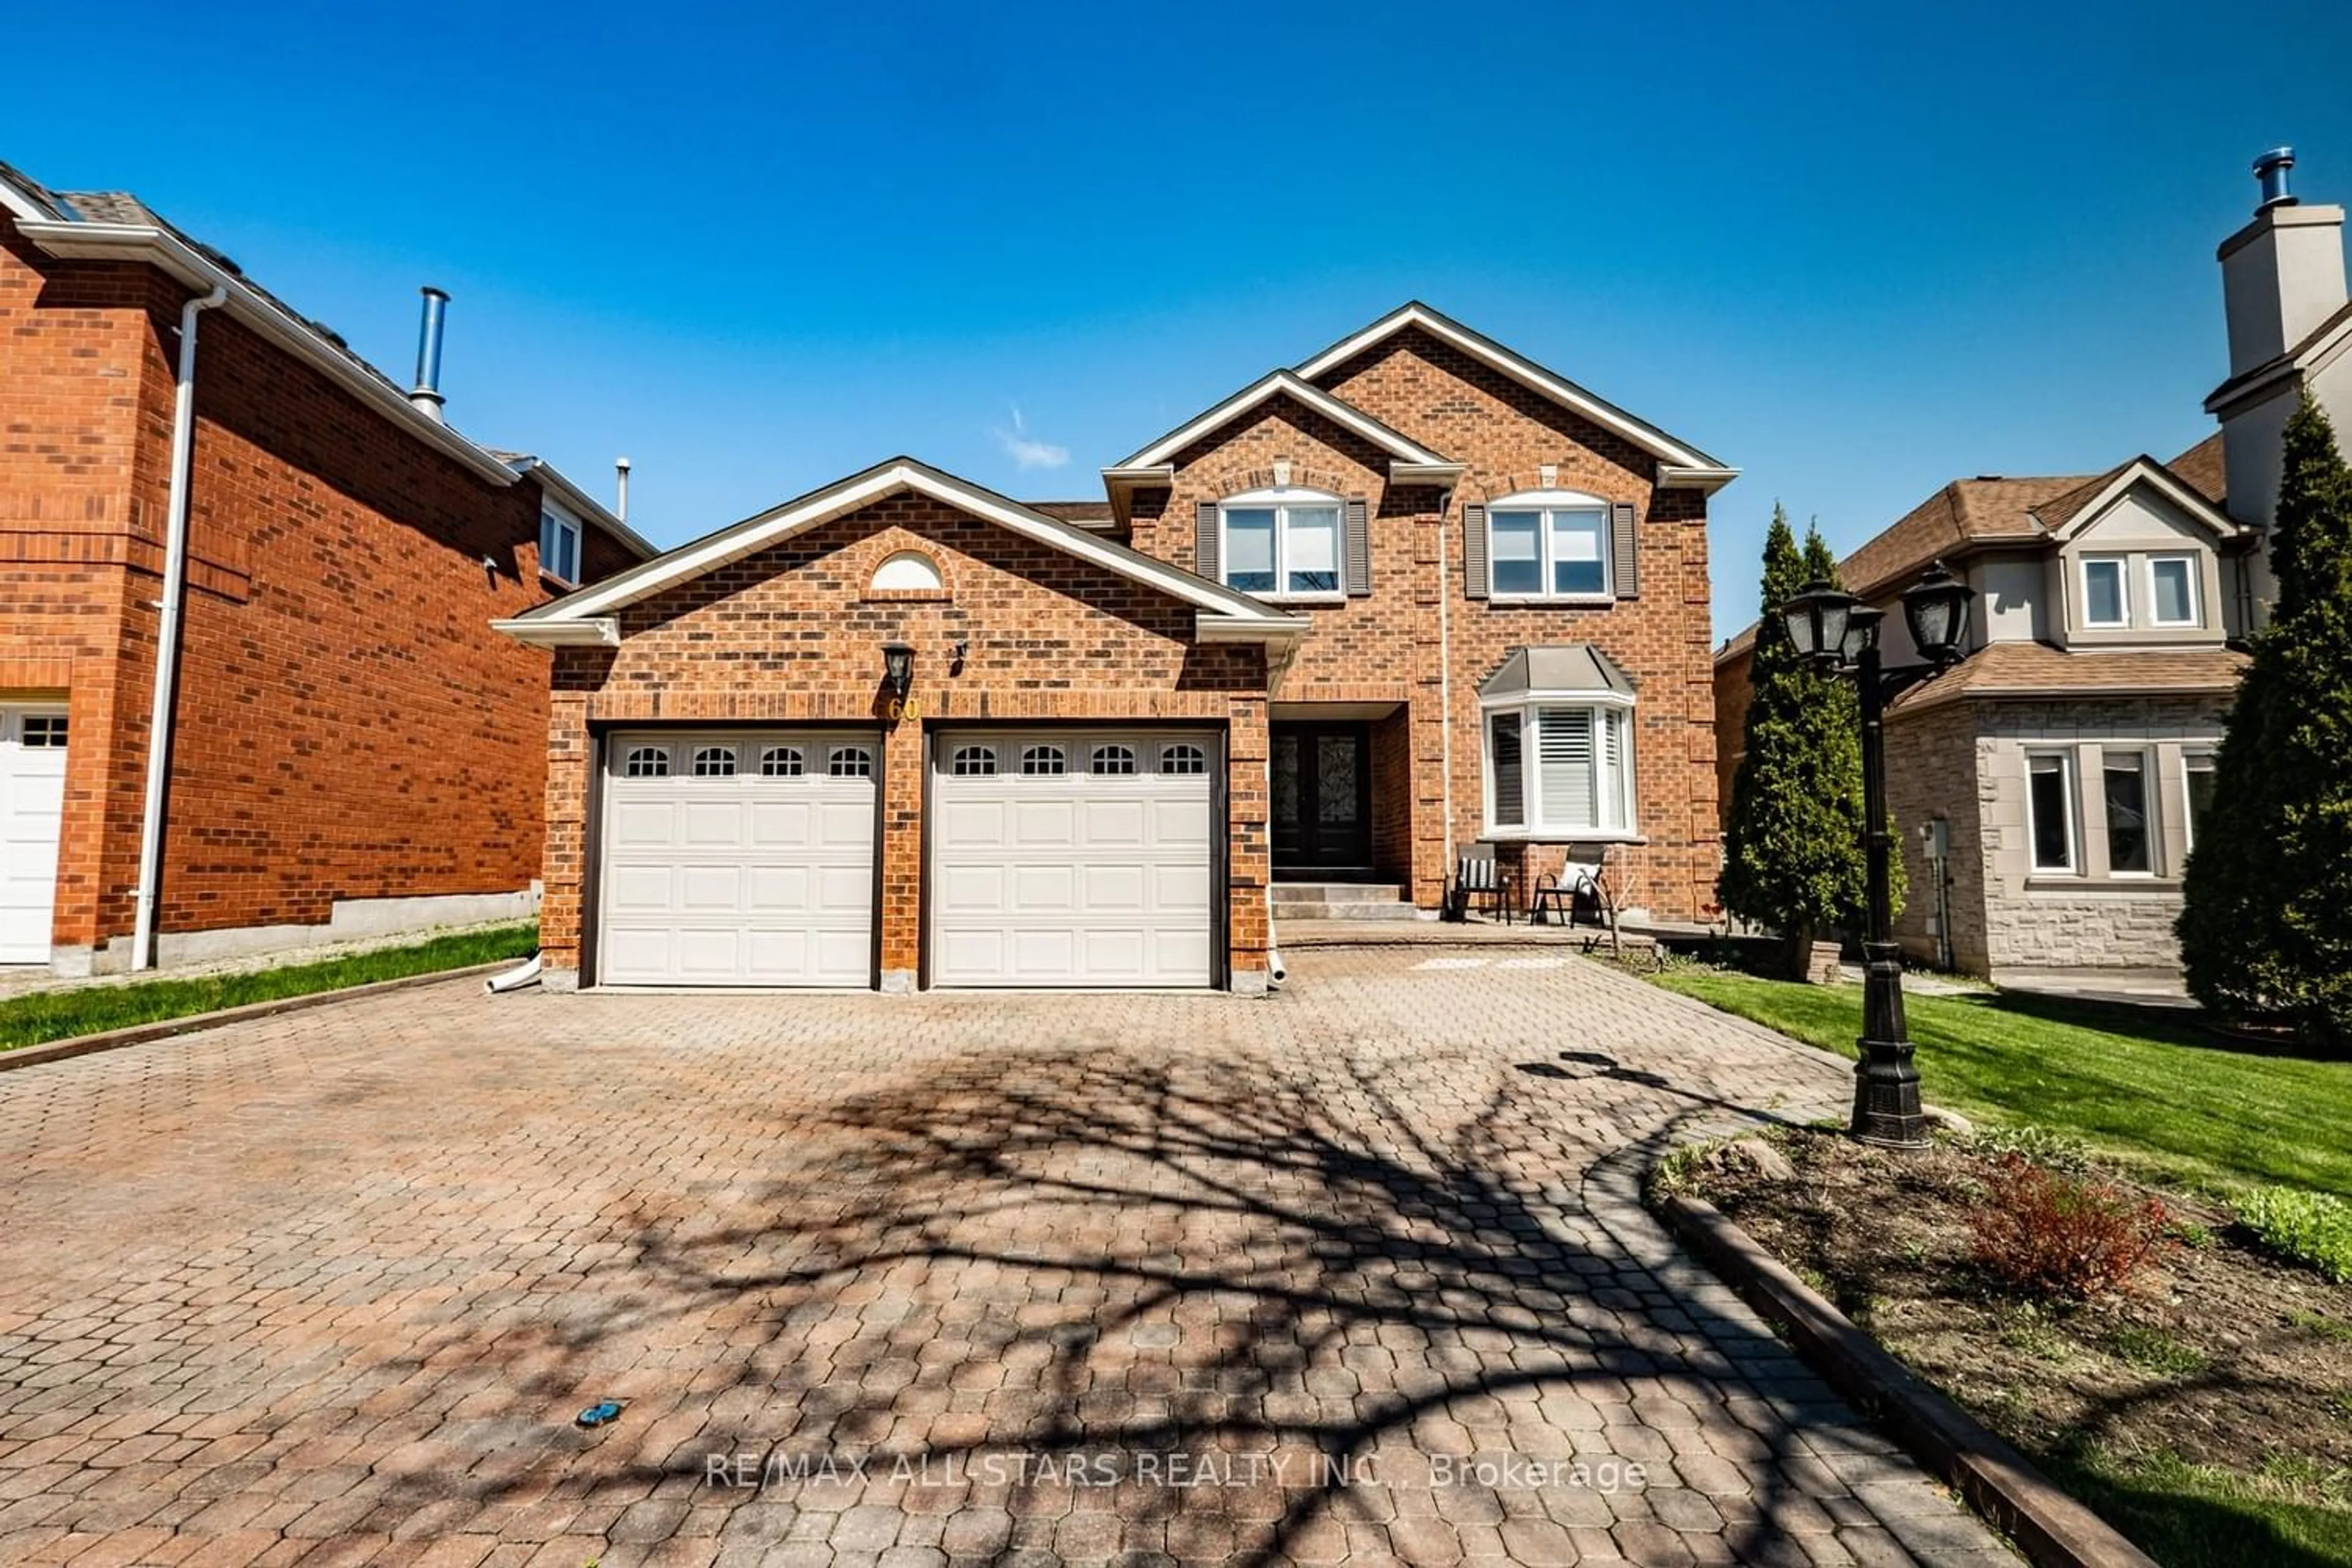 Home with brick exterior material for 60 Conistan Rd, Markham Ontario L3R 8K5